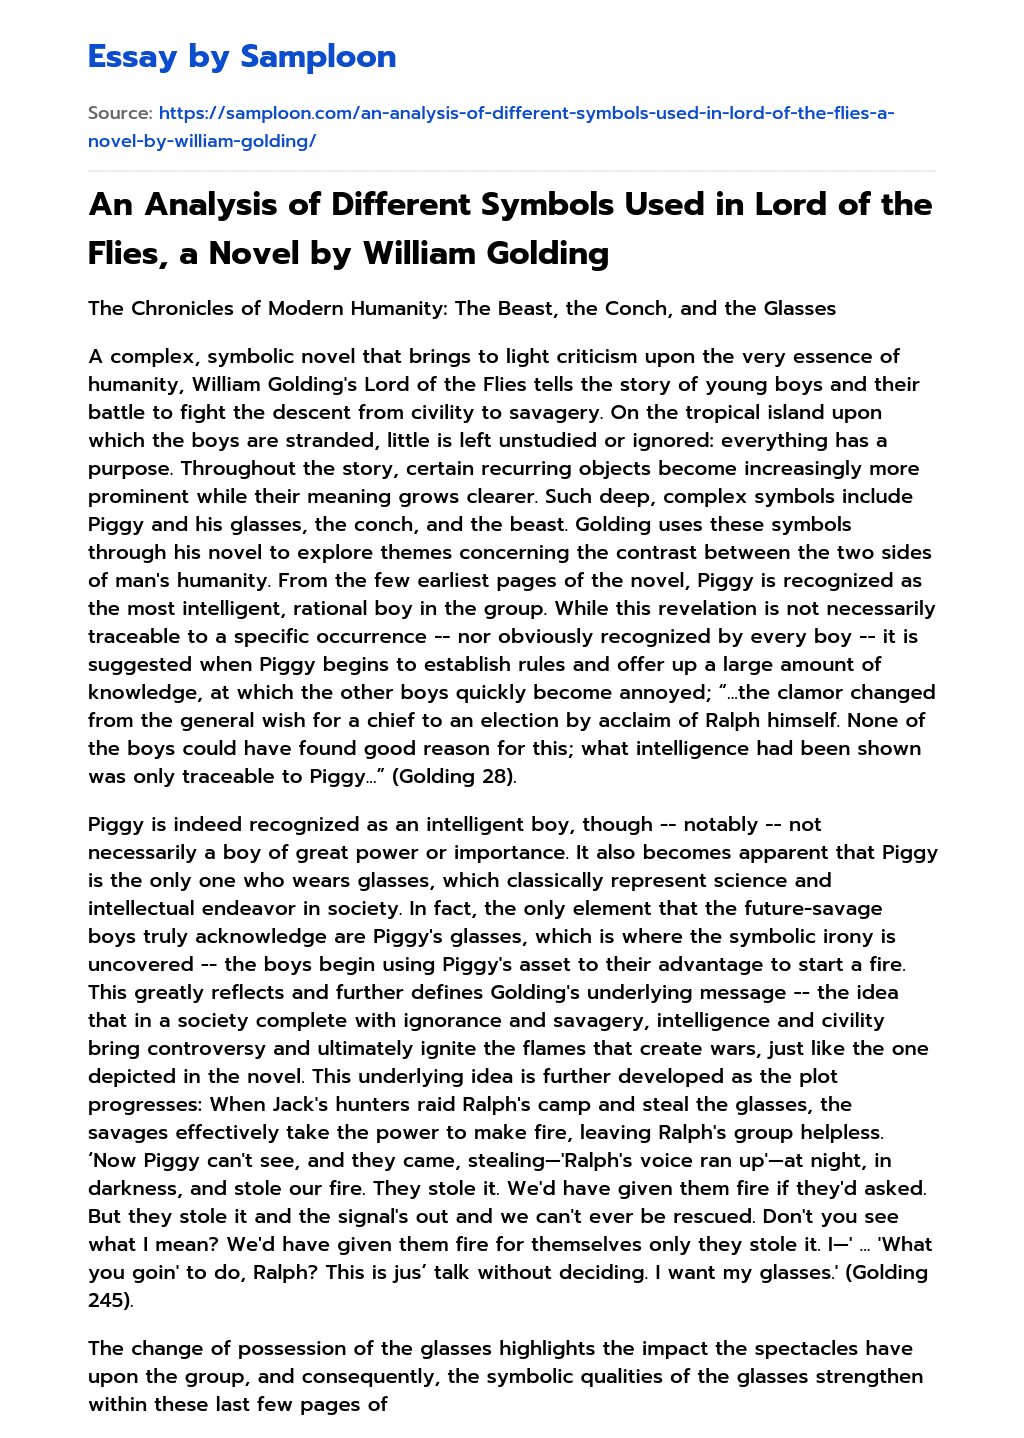 An Analysis of Different Symbols Used in Lord of the Flies, a Novel by William Golding essay